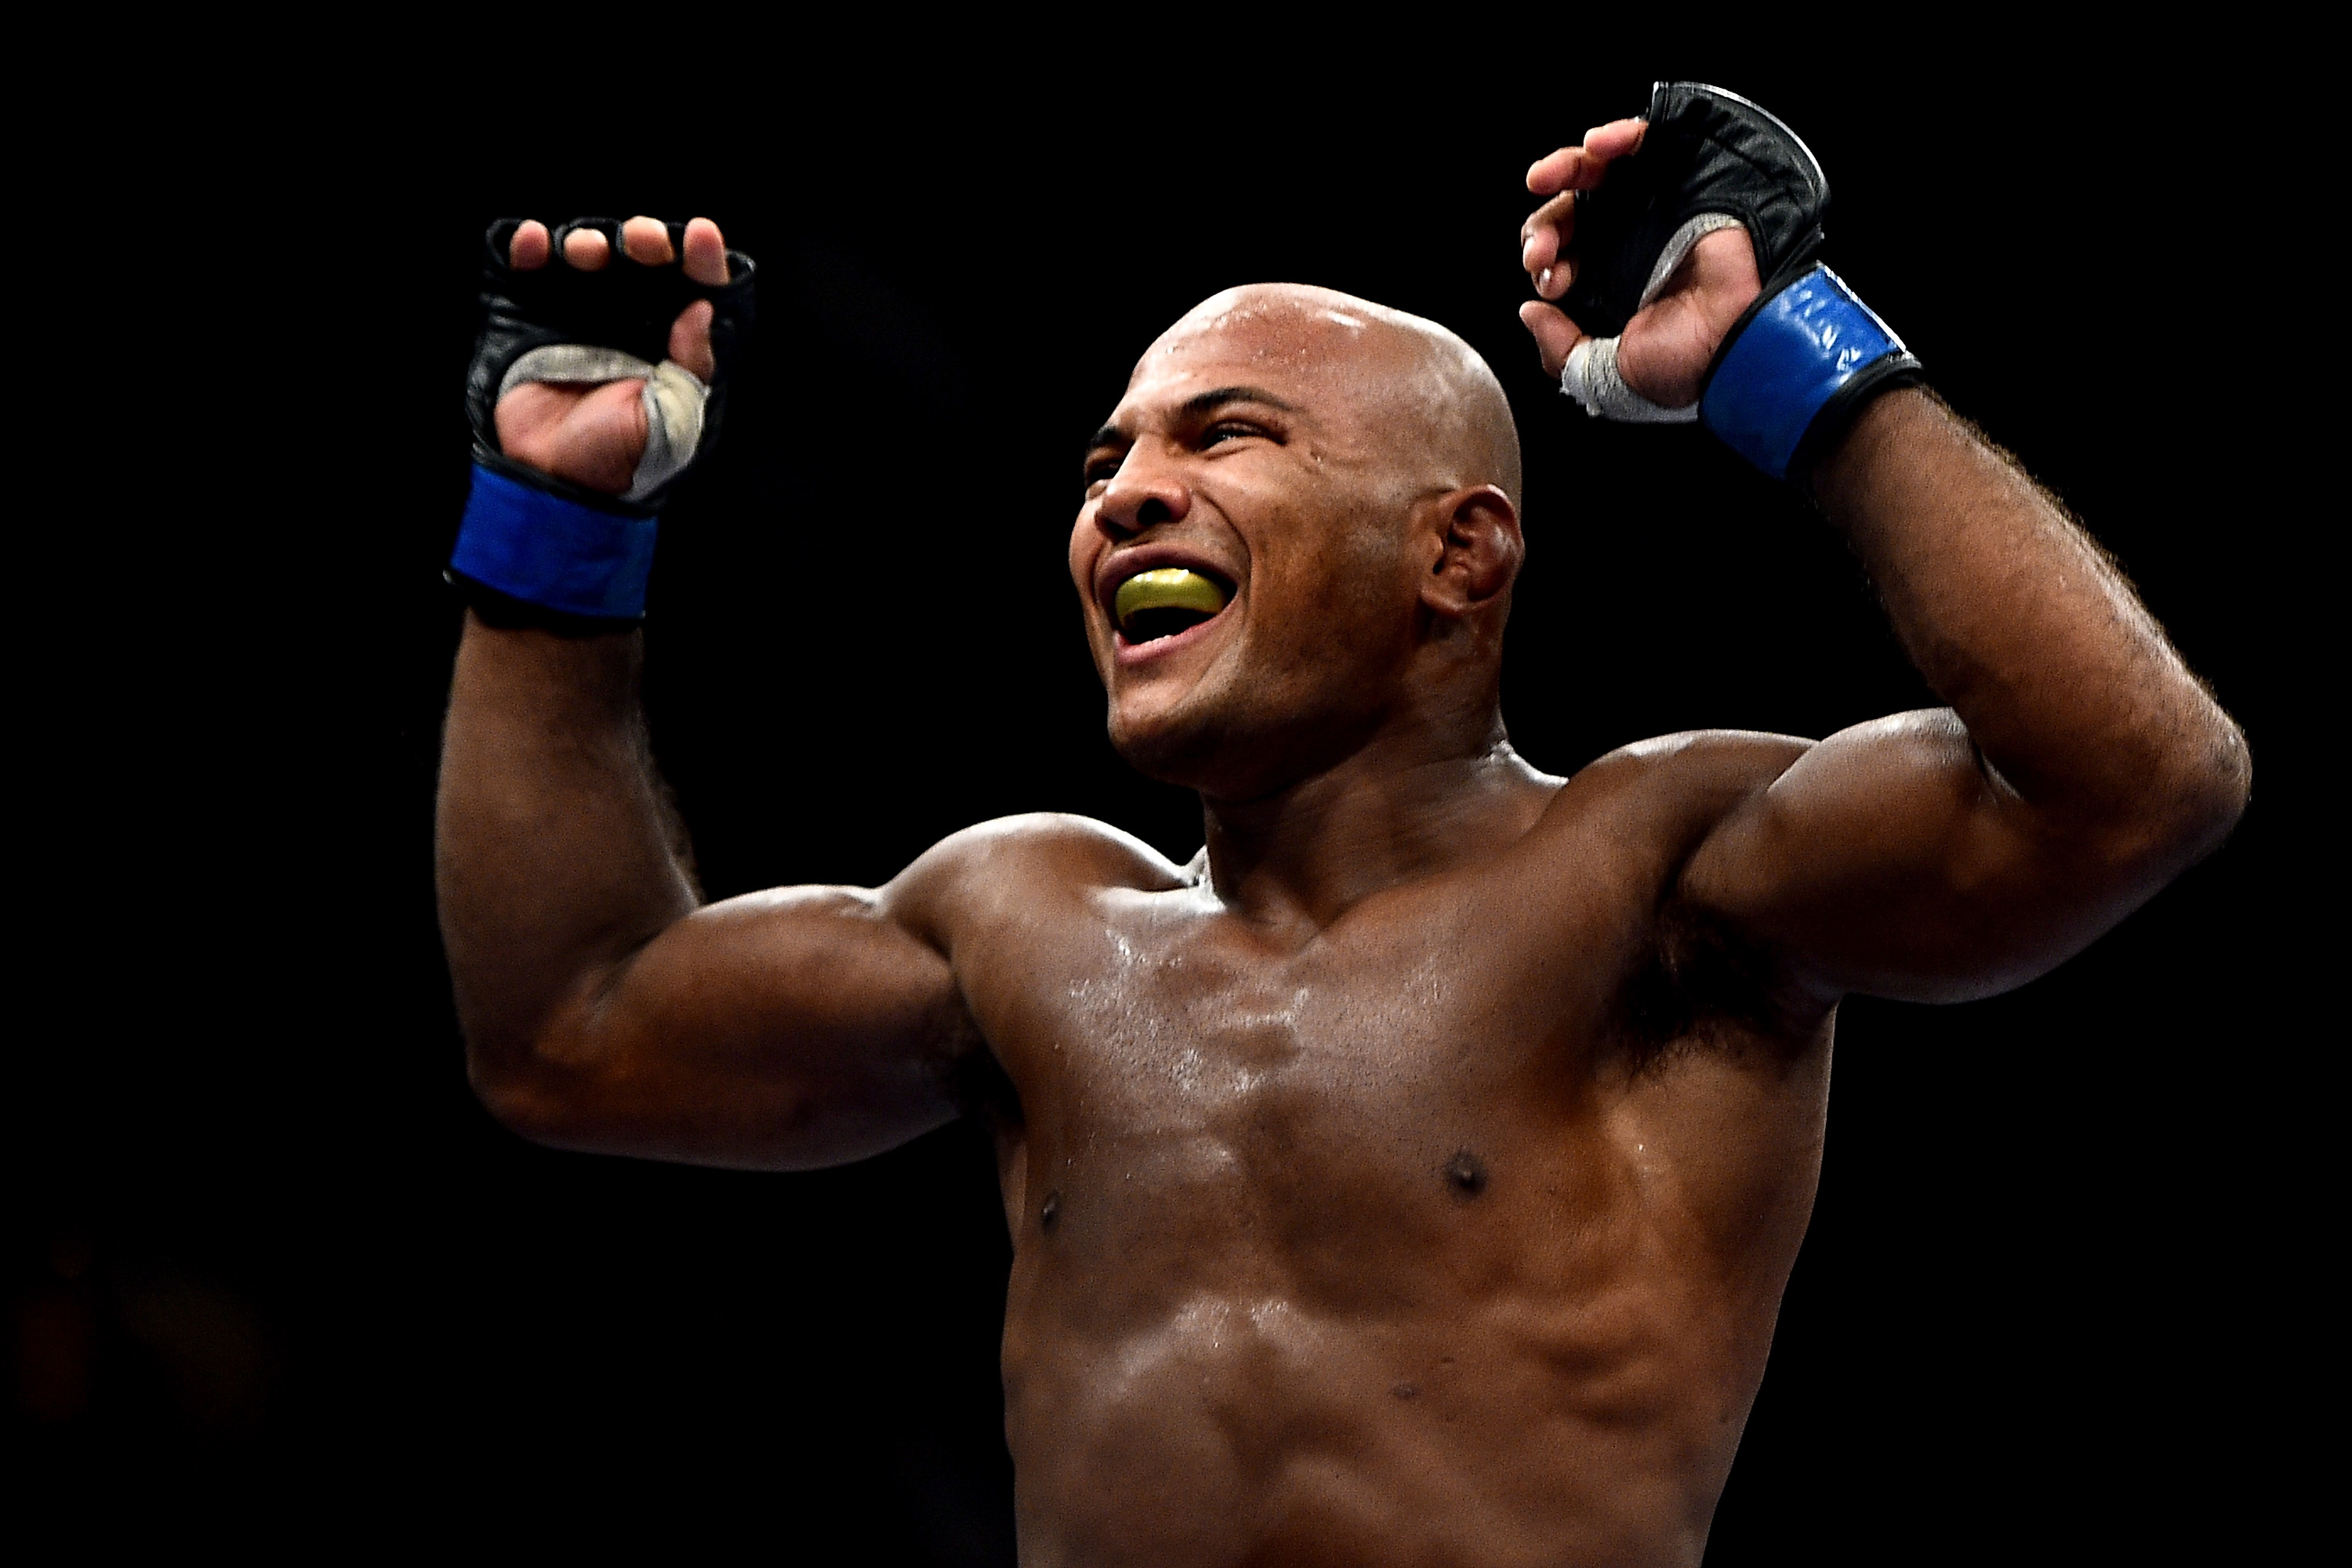 Wilson Reis faces Jussier Formiga at UFC Fight Night 67. Getty